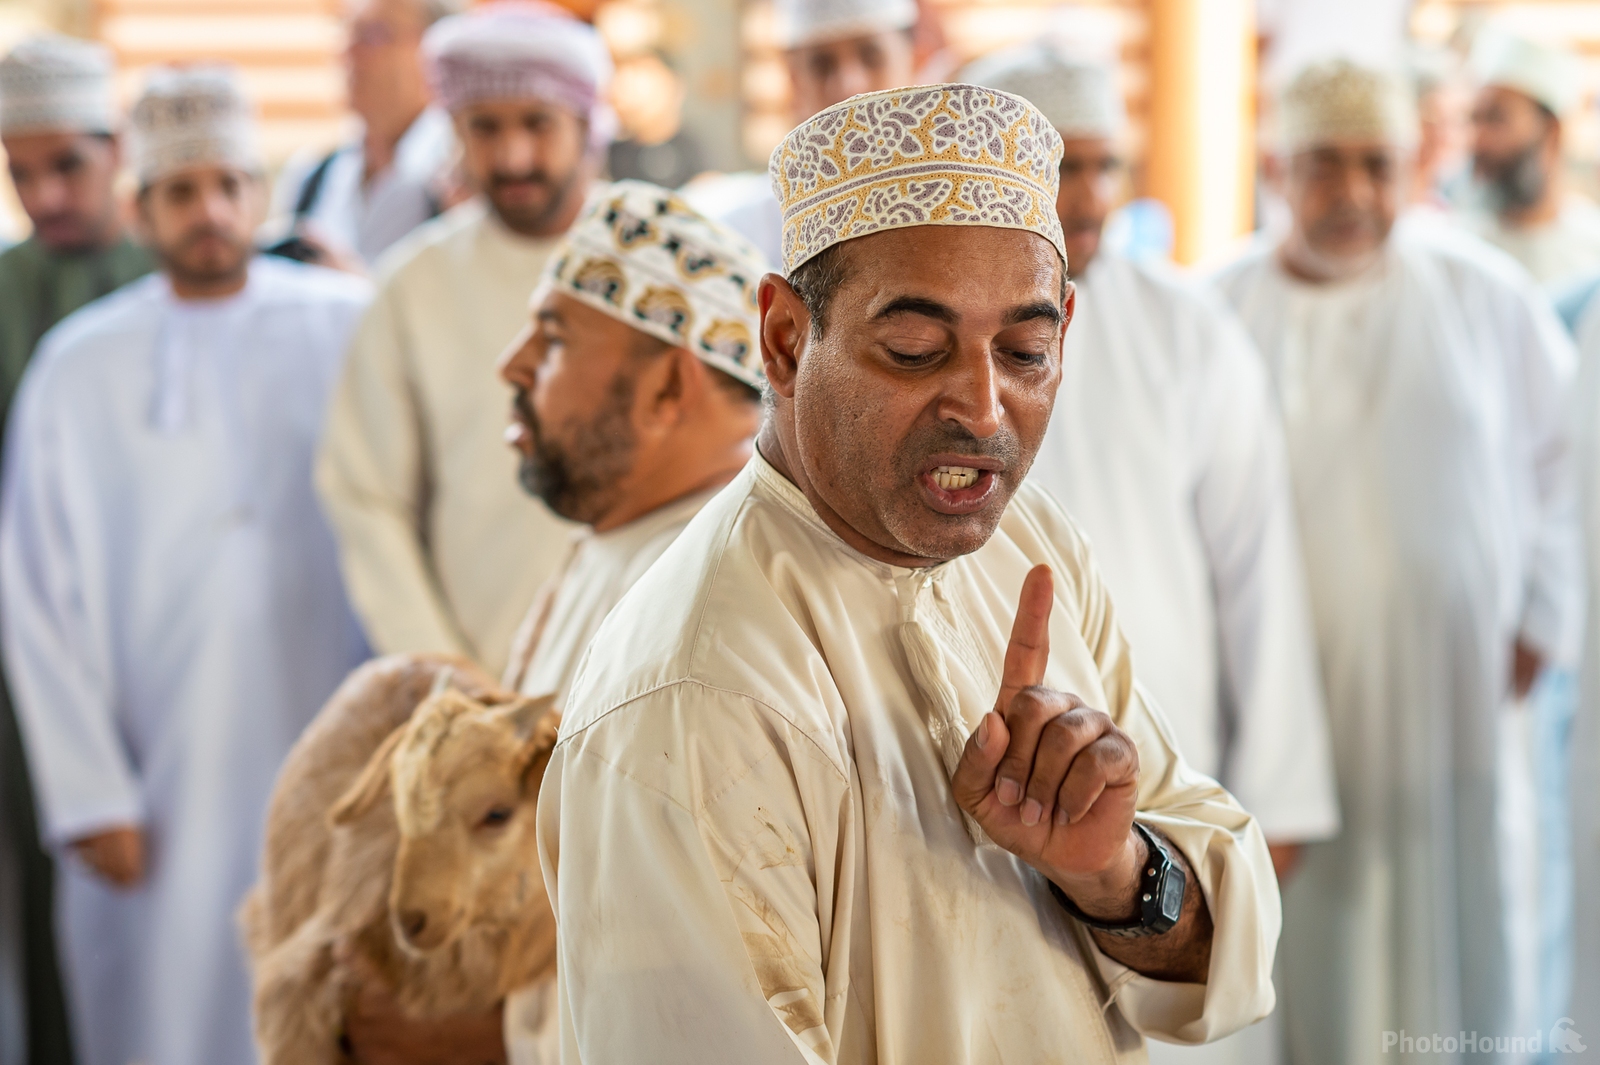 Image of The Goat Market in Nizwa, Oman by Sue Wolfe